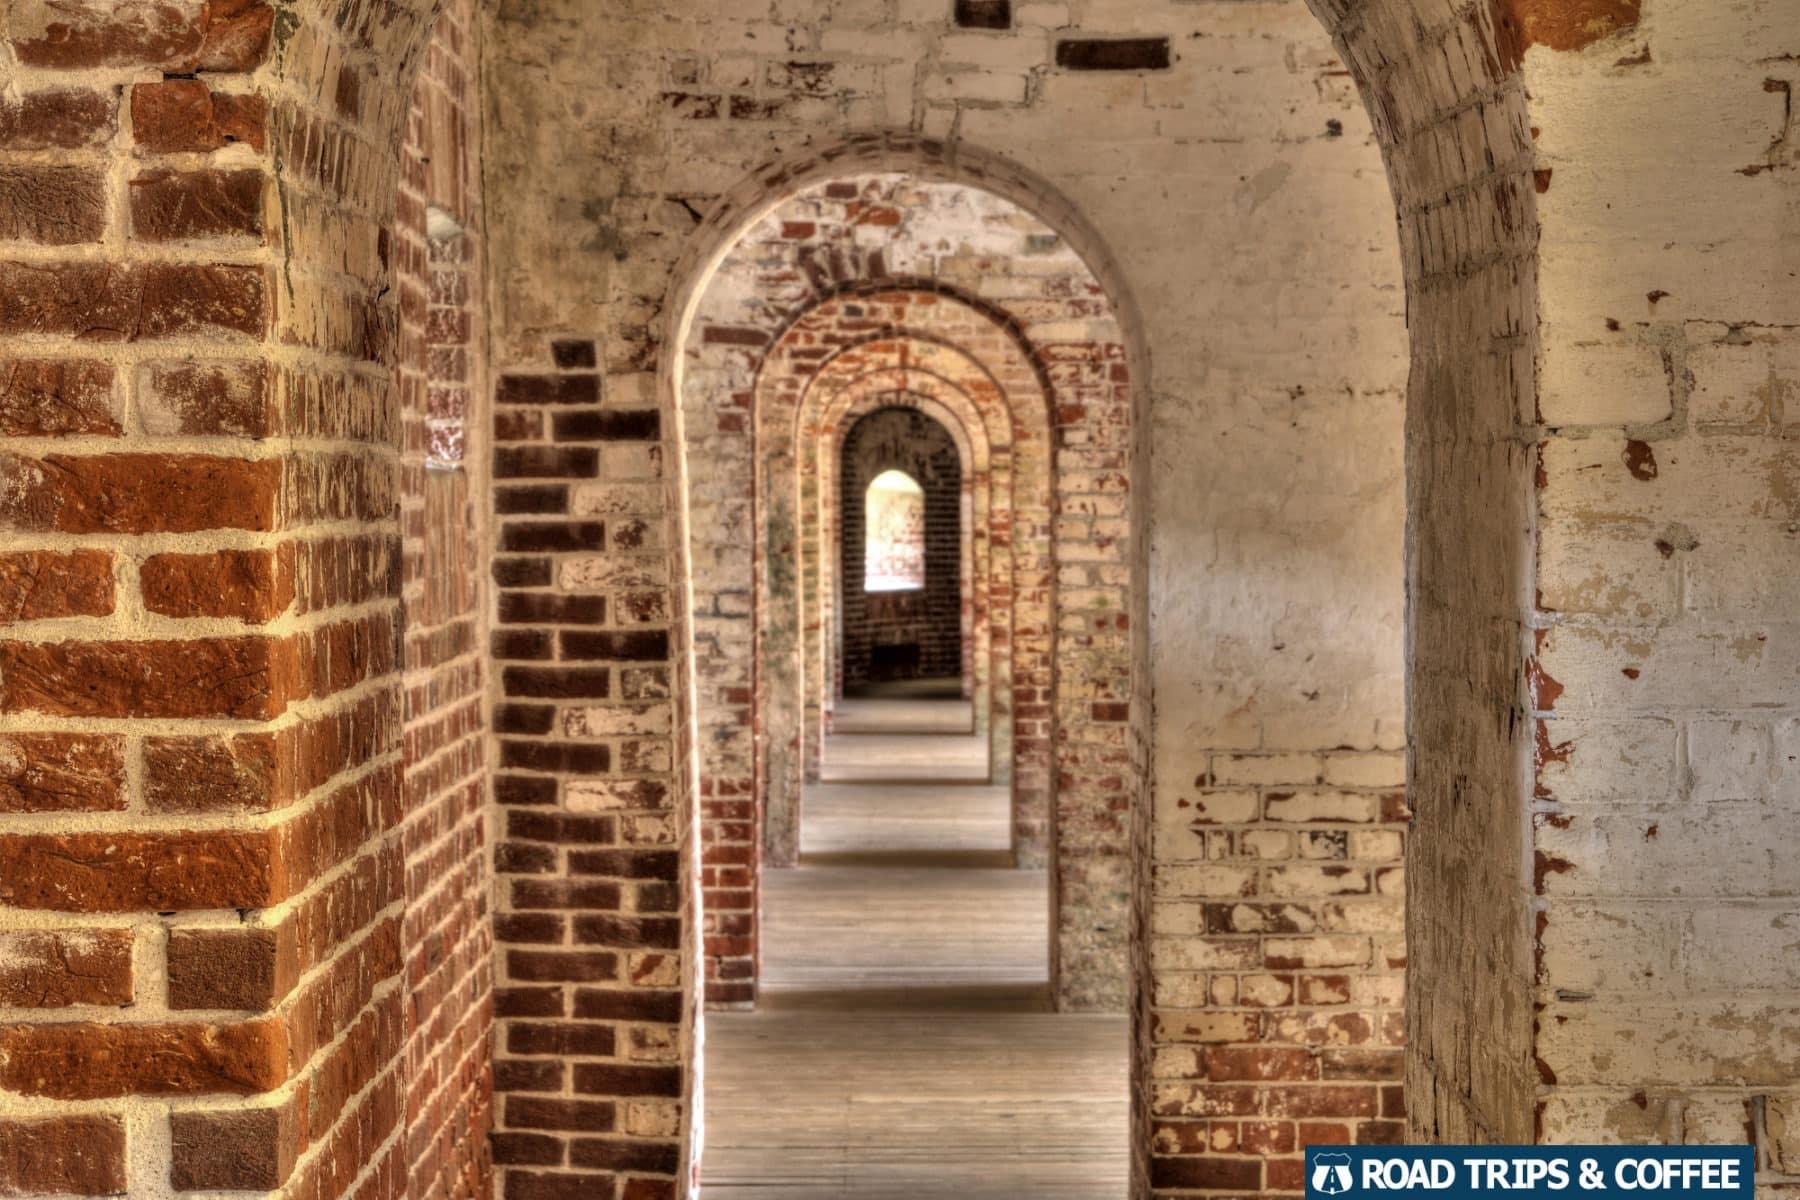 Arched brick doorways, one after another, connecting the rear section of rooms inside Fort Macon State Park in Atlantic Beach, North Carolina